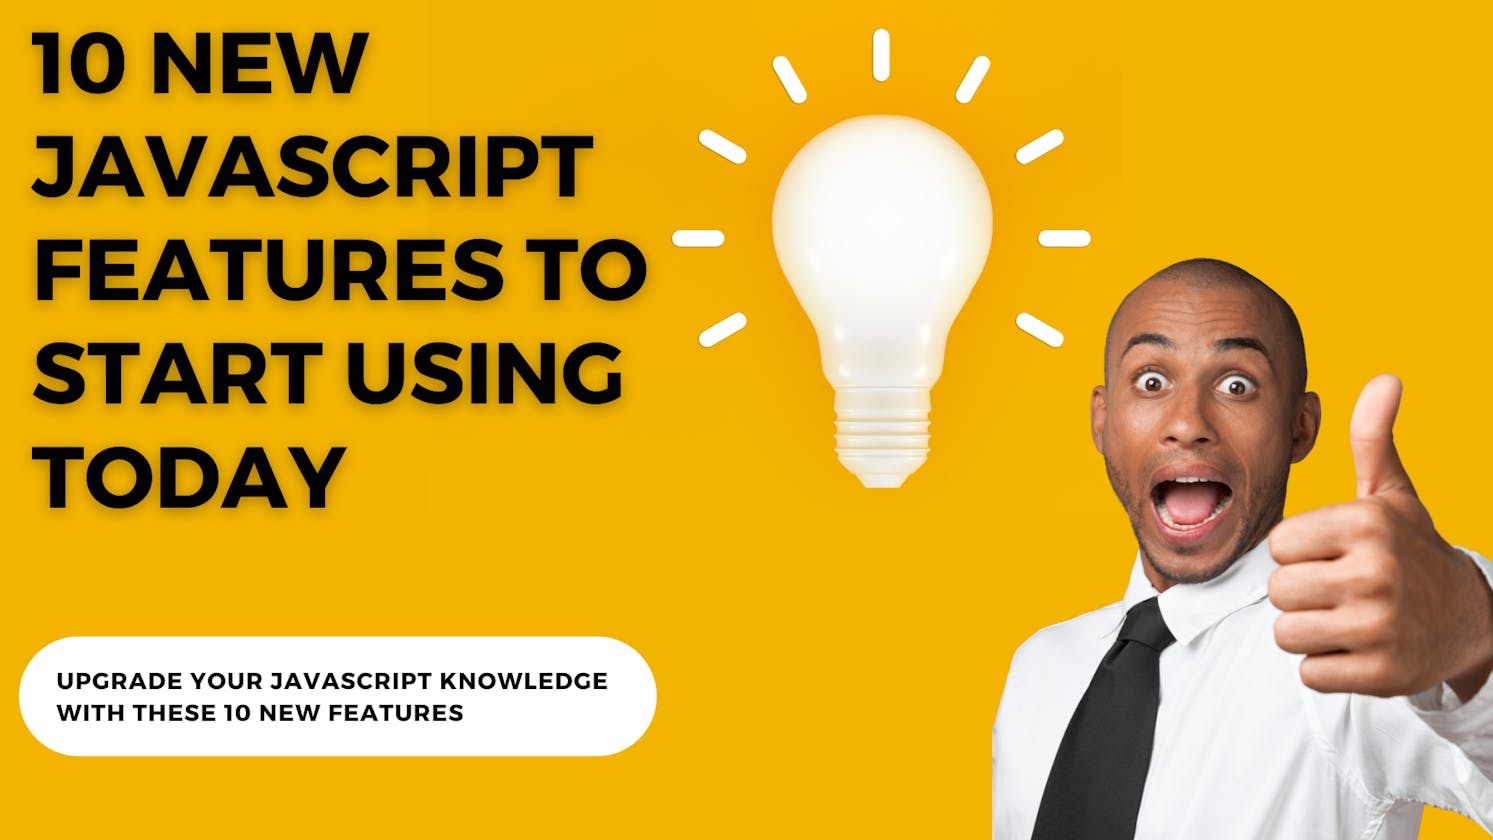 10 New JavaScript features to start using today